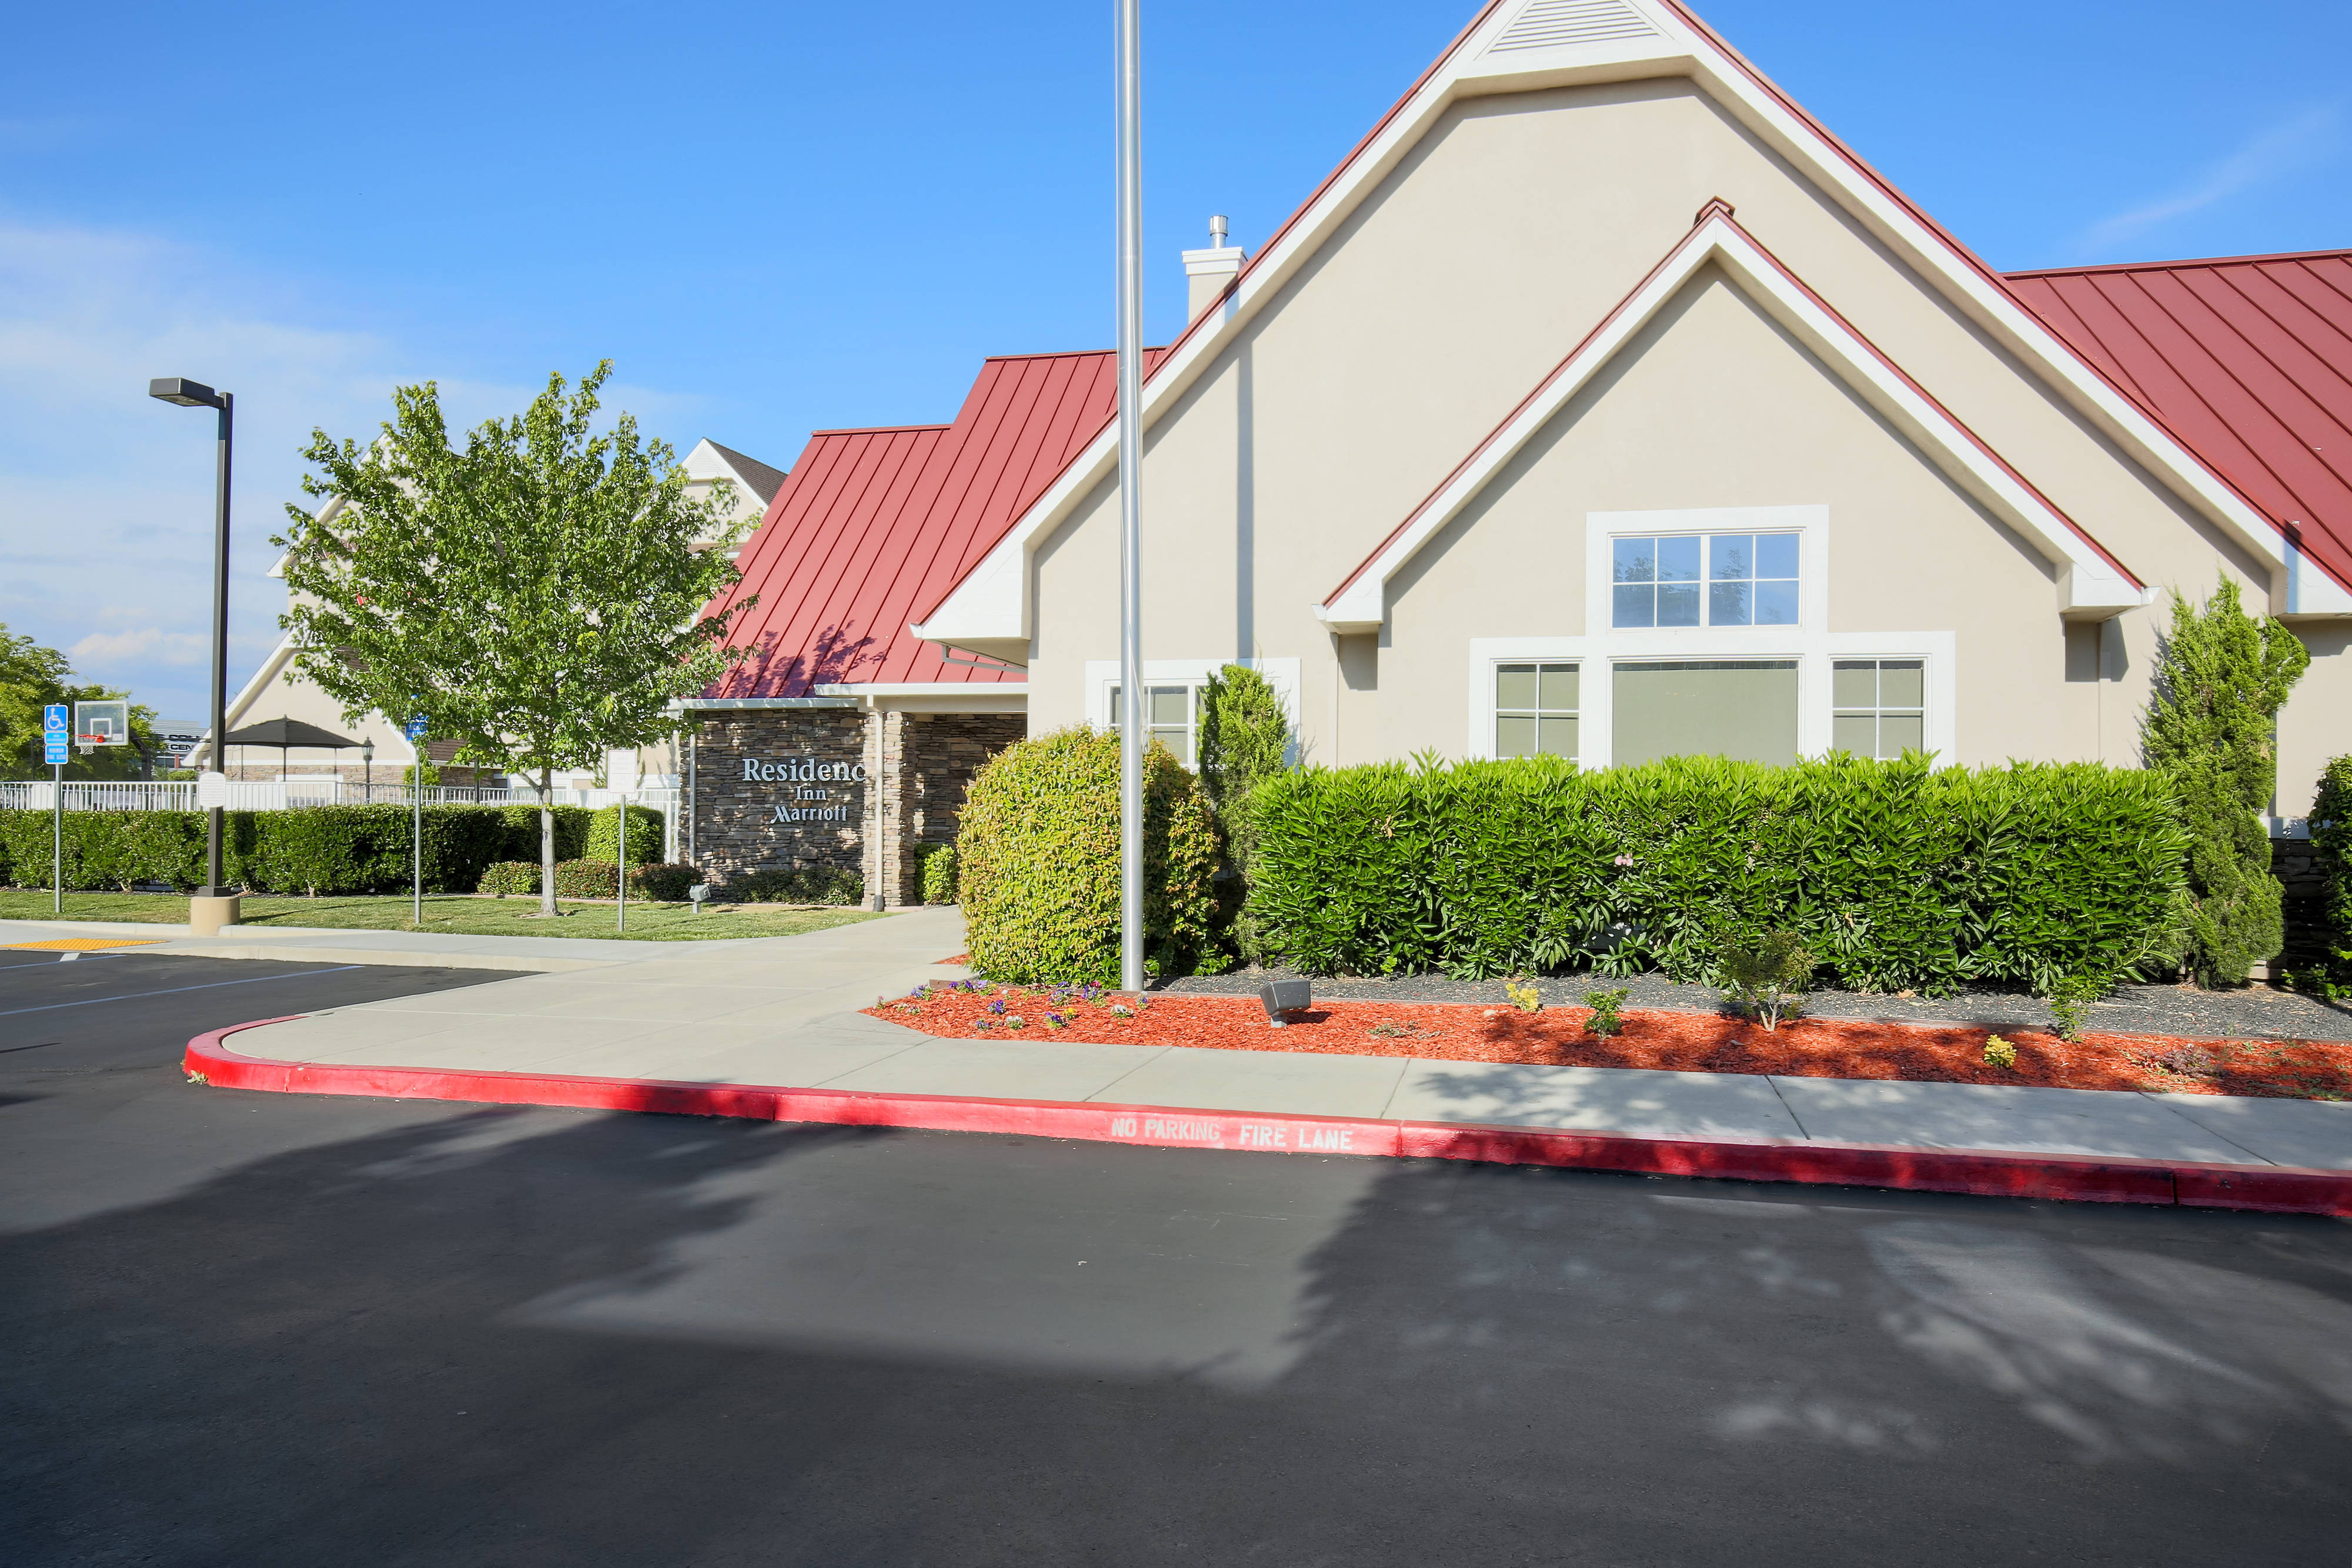 Photo of Residence Inn by Marriott Chico, Chico, CA